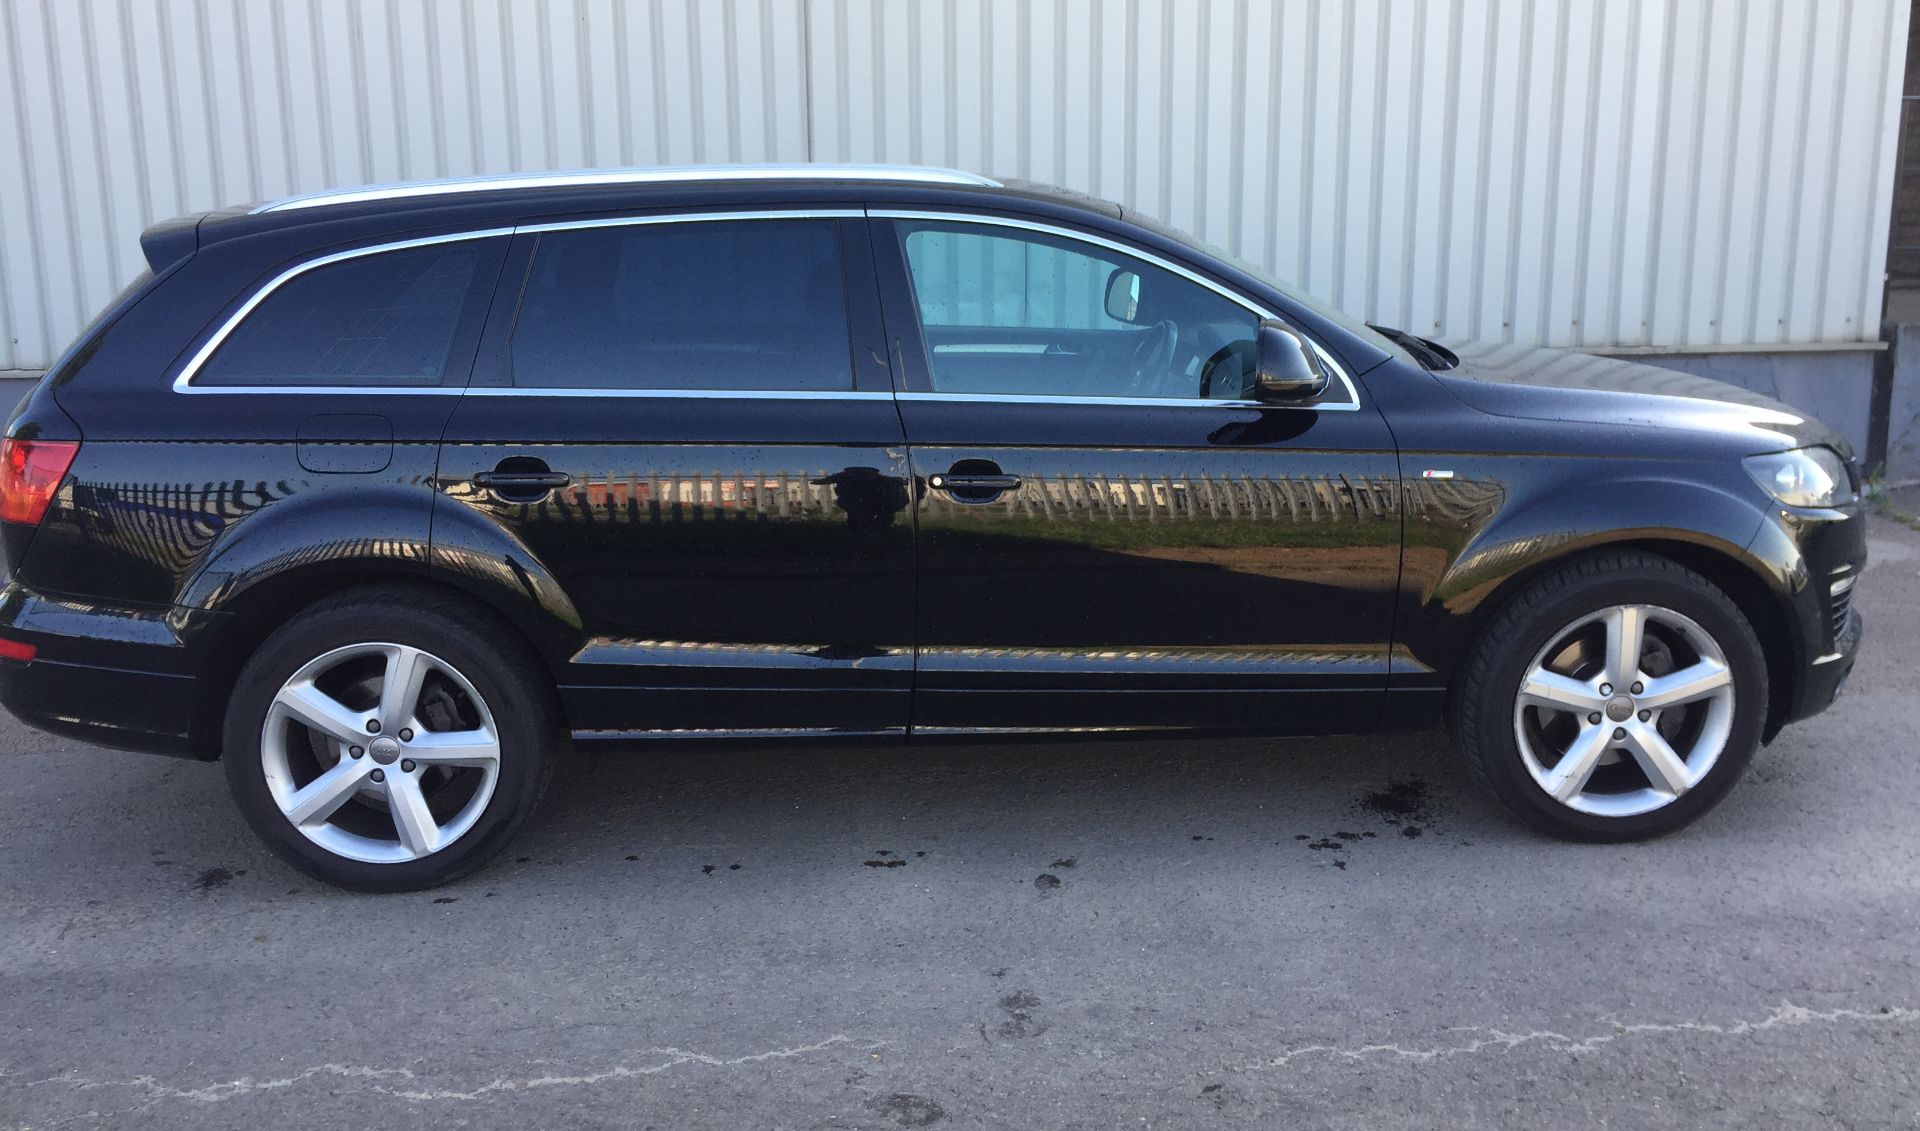 2008 Audi Q7 S Line 3.0 Tdi Quattro 5Dr 4x4 - CL505 - NO VAT ON THE HAMMER - Location: Corby, Northa - Image 2 of 17